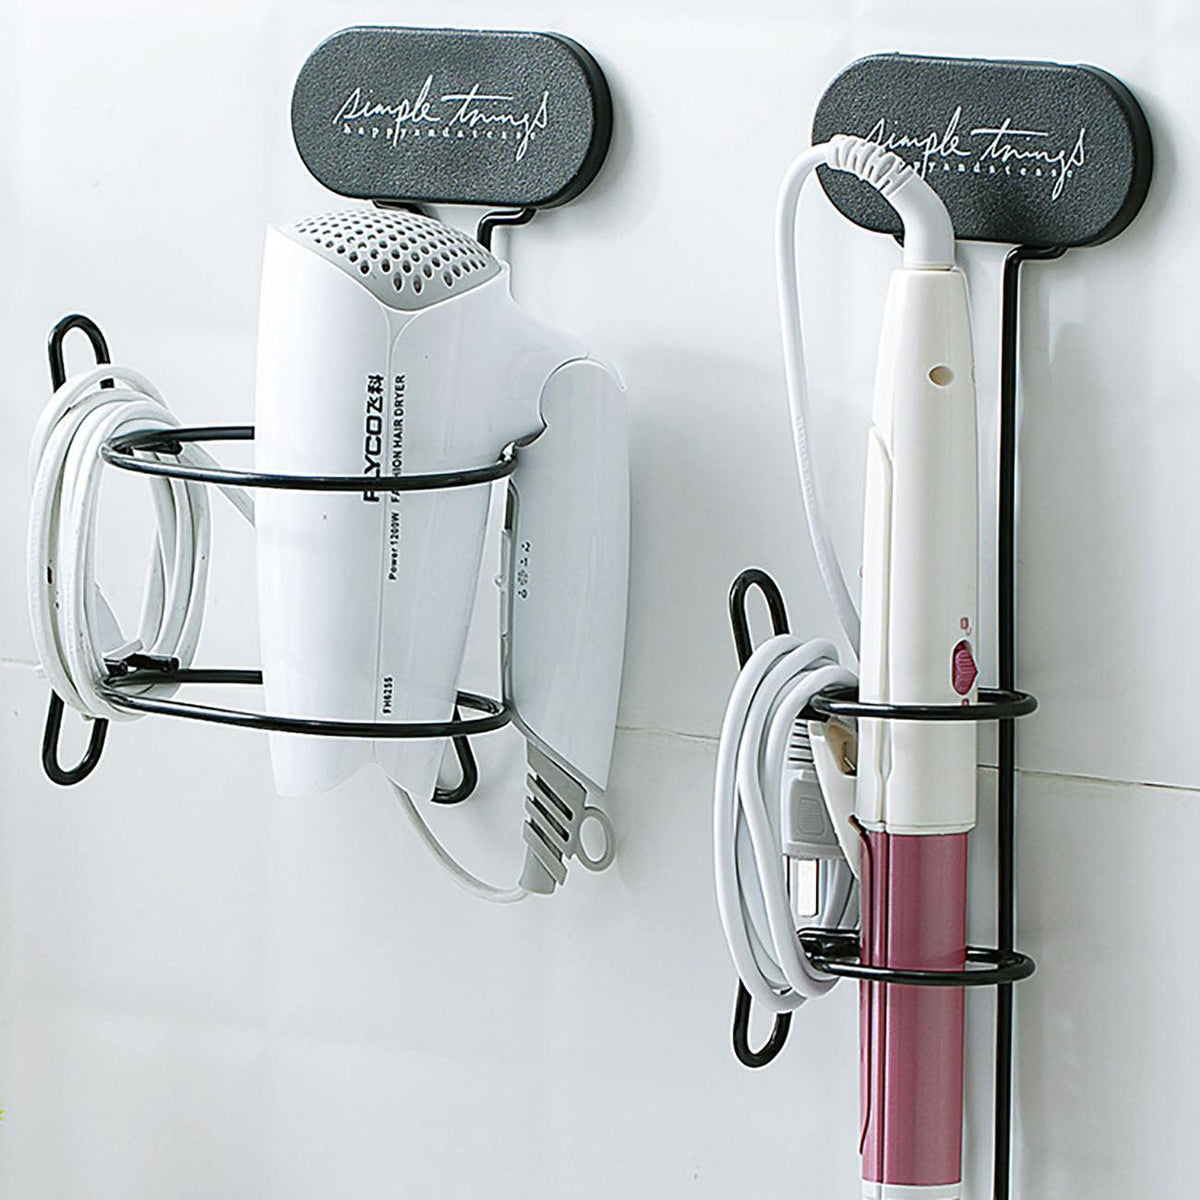 Curling Iron Holder Bathroom Storage For Hair Dryers, Flat Irons